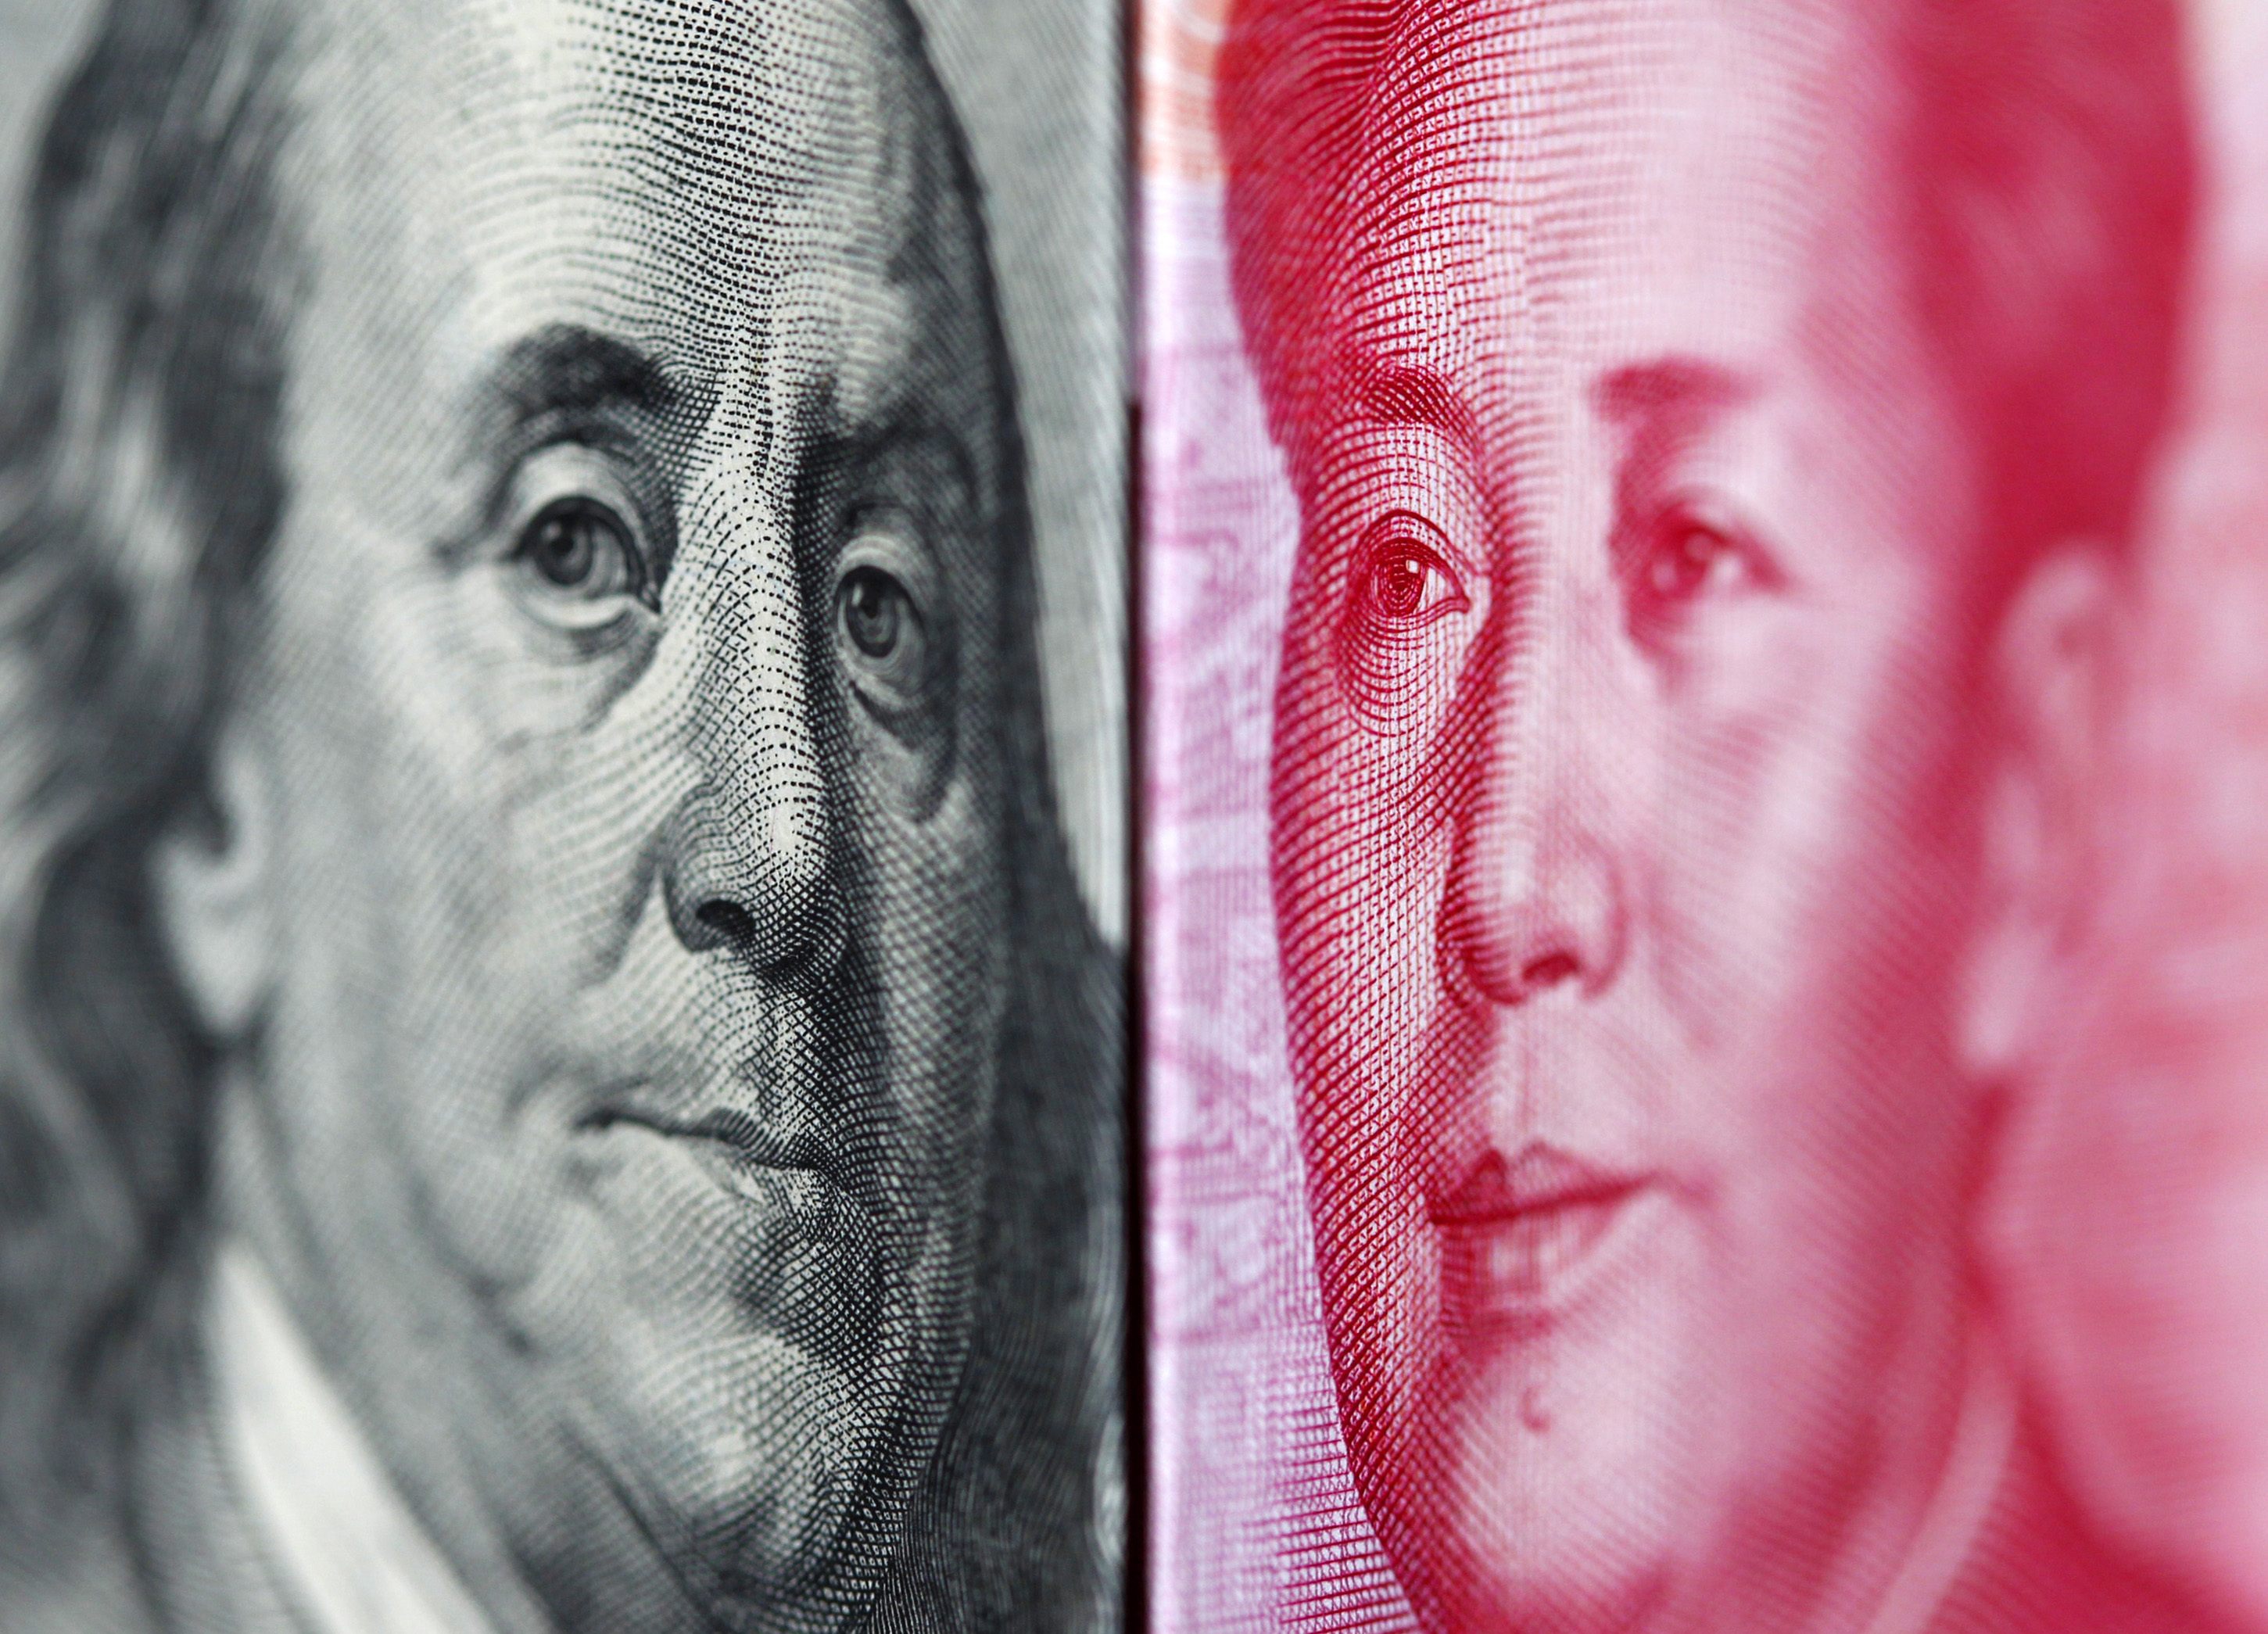 Analysts doubt the yuan will take over the greenback’s leading role in the global monetary system any time soon. Photo: Reuters